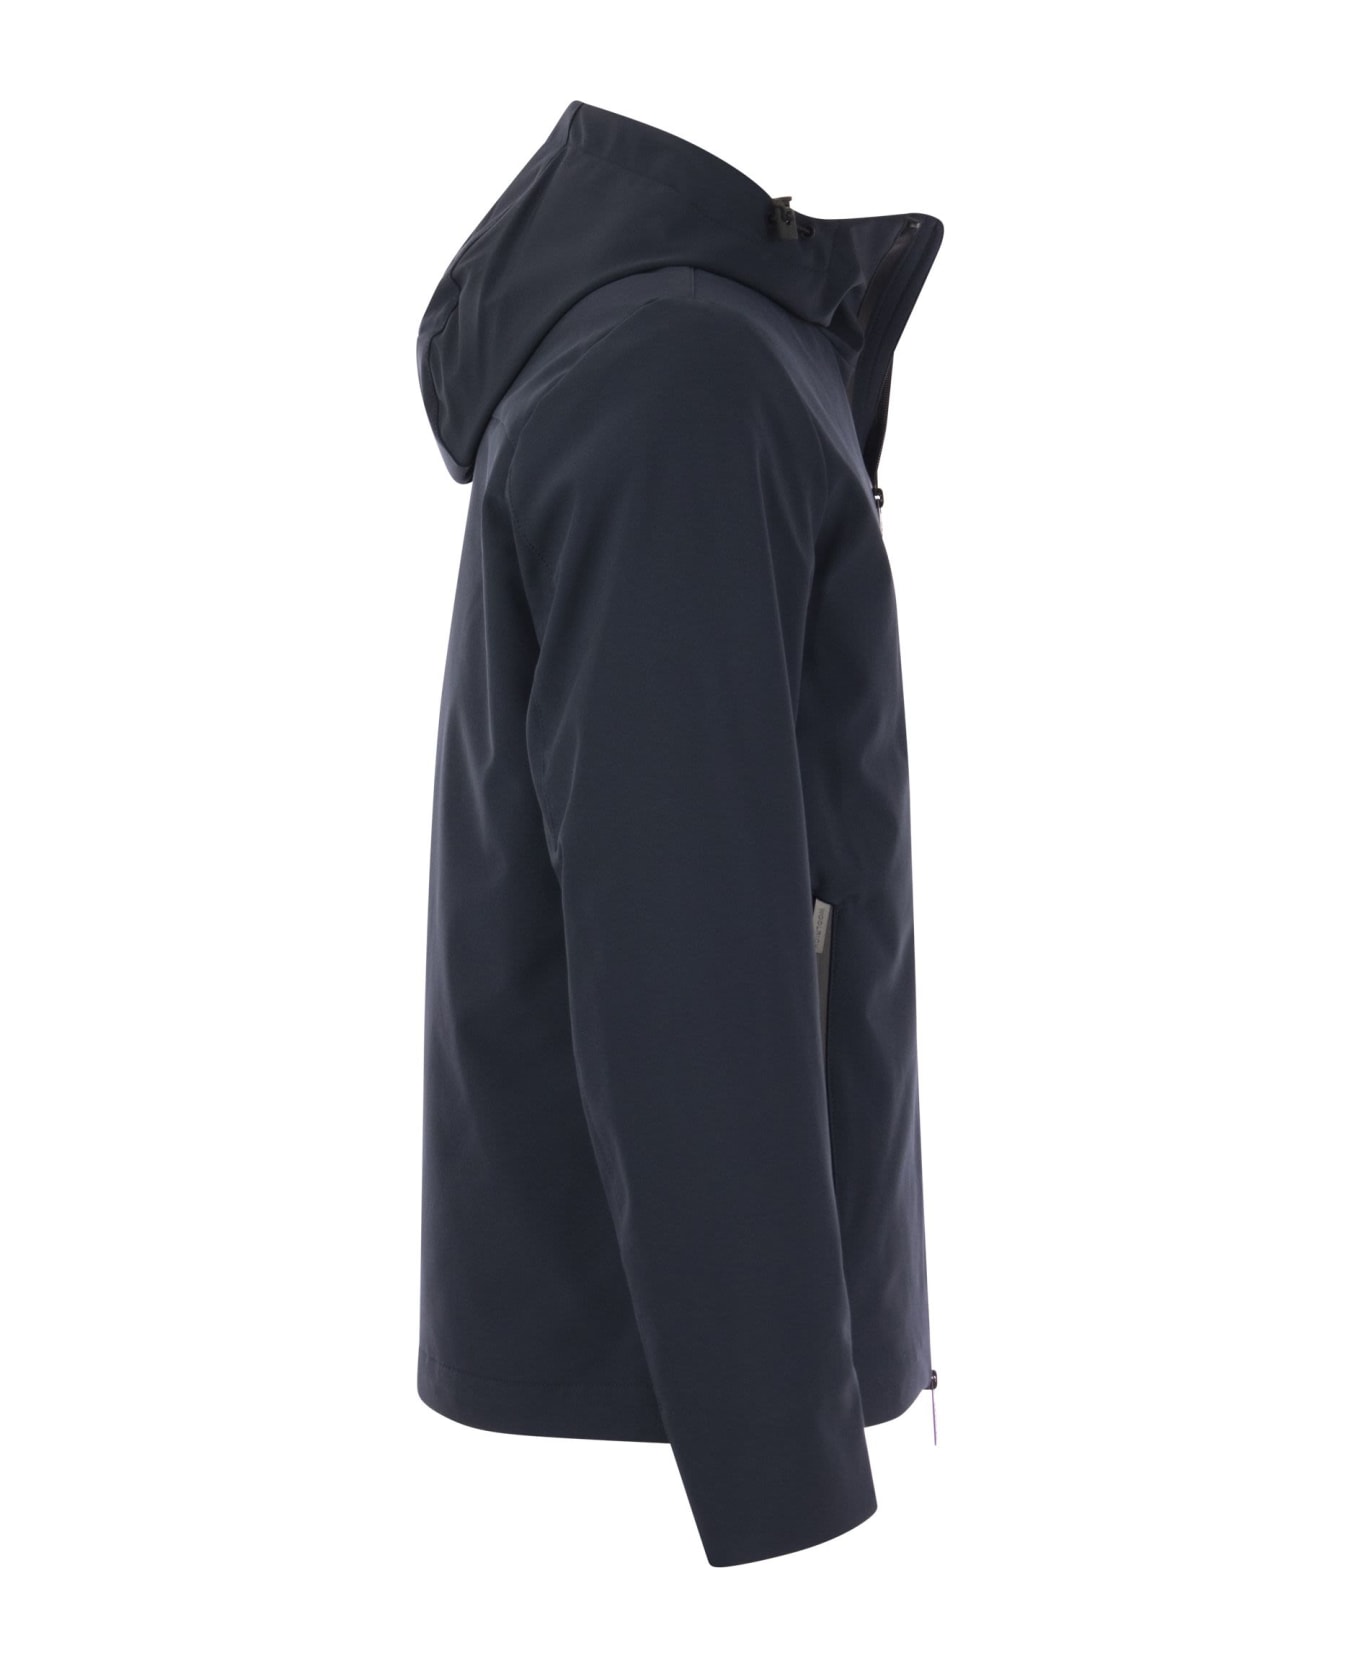 Woolrich Pacific - Softshell Jacket - Blue ジャケット